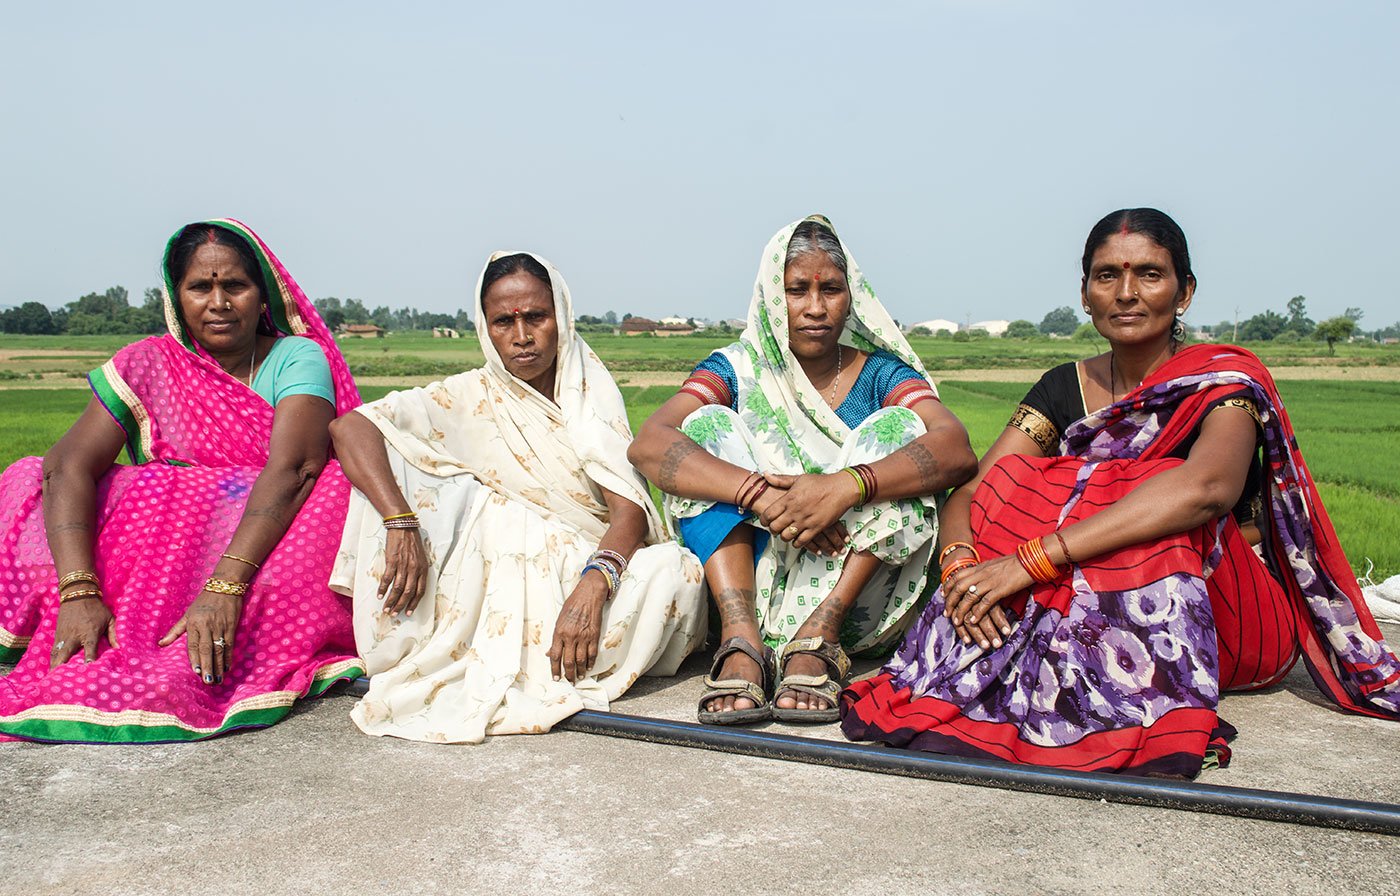 The women from All India Union for Forest Working People. Left to right: Lalti, Rajkumari, Sukalo, Shoba